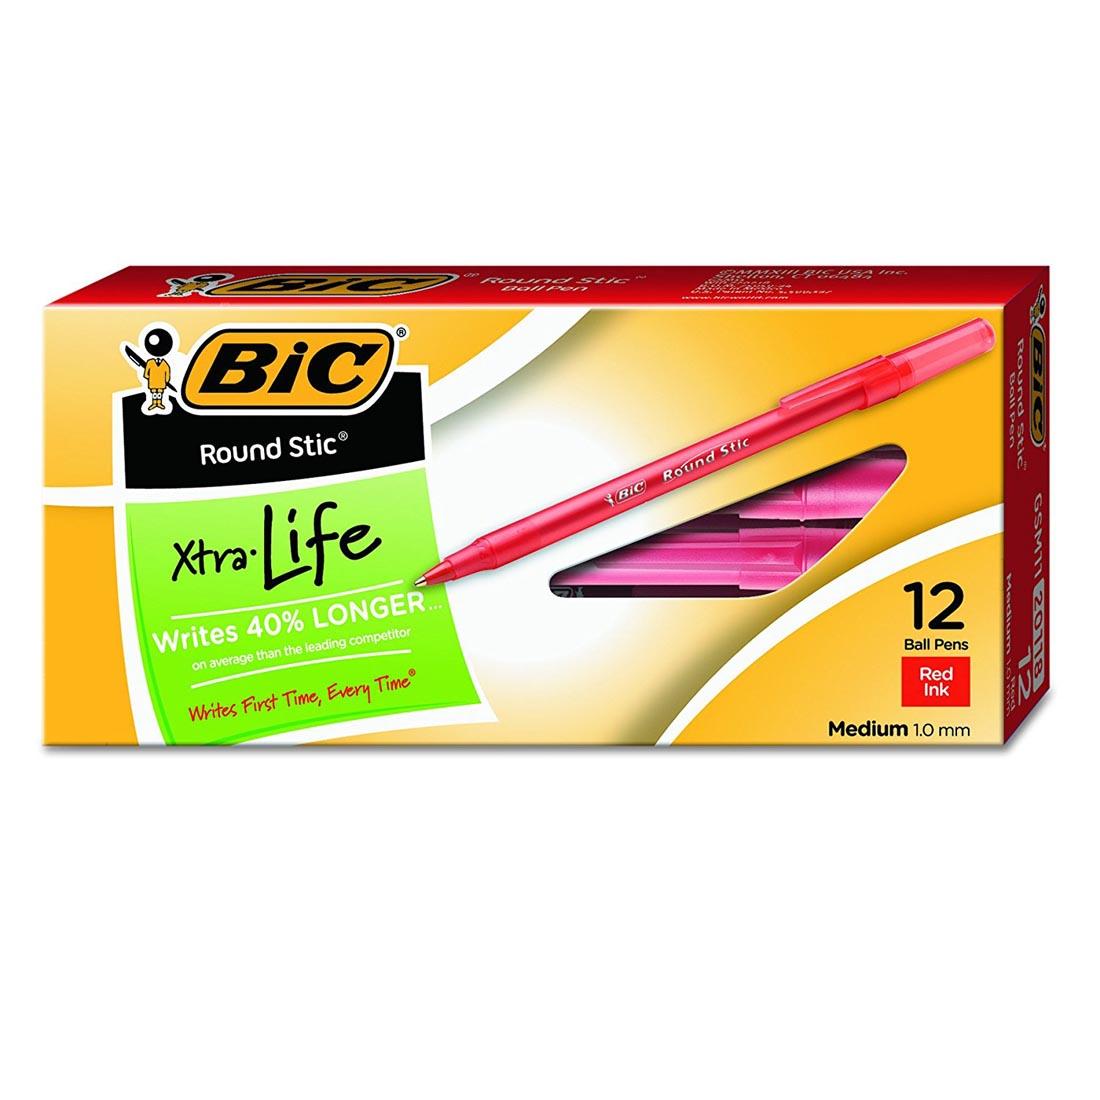 BiC Round Stic Xtra Life Ball-Point Red Pens